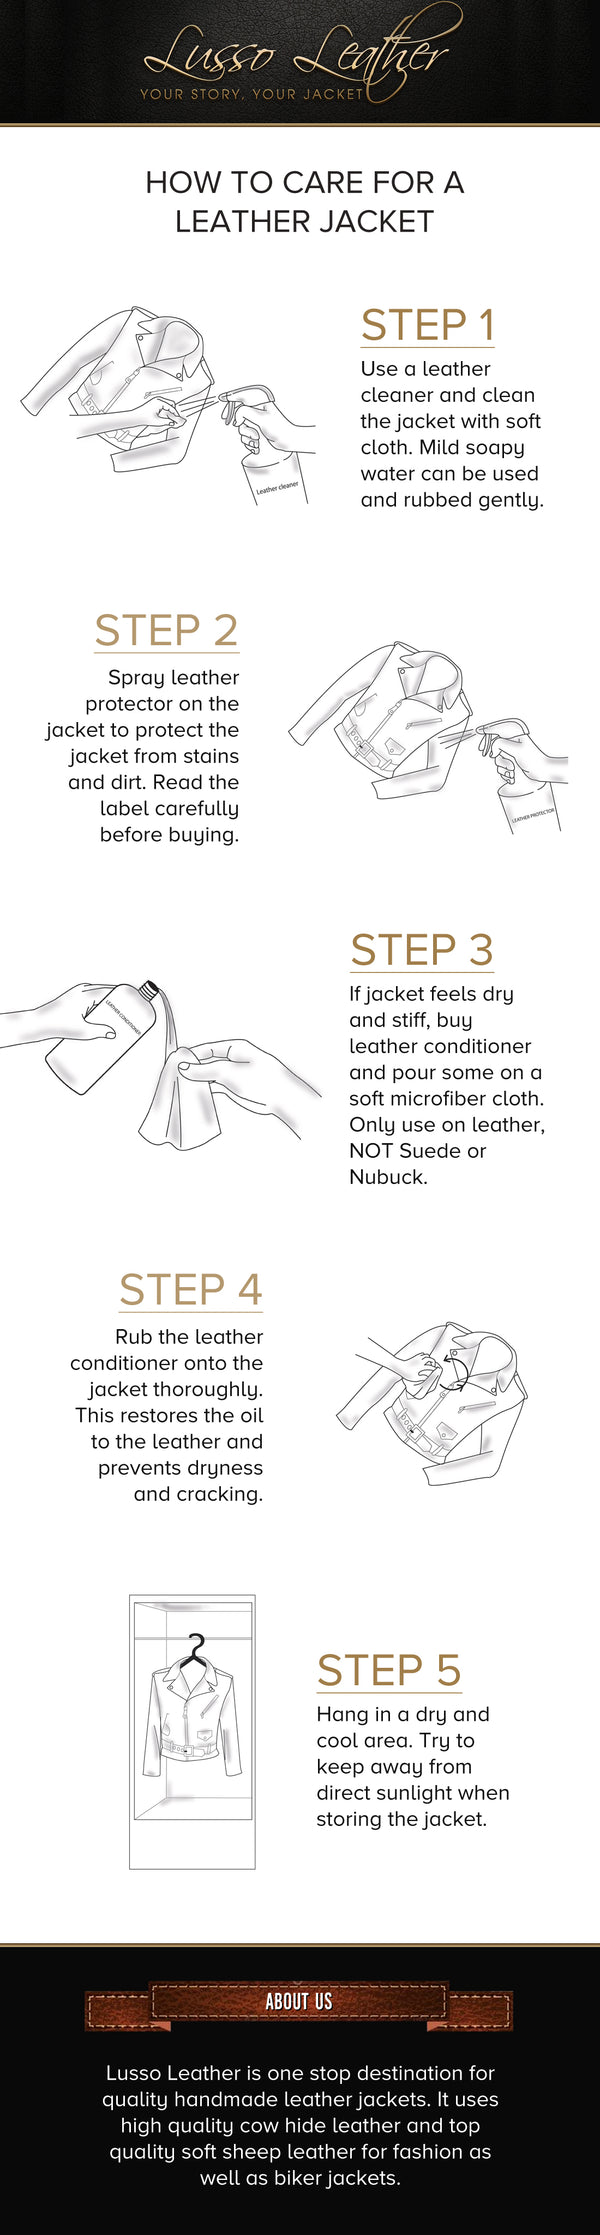 How to care for a Leather Jacket